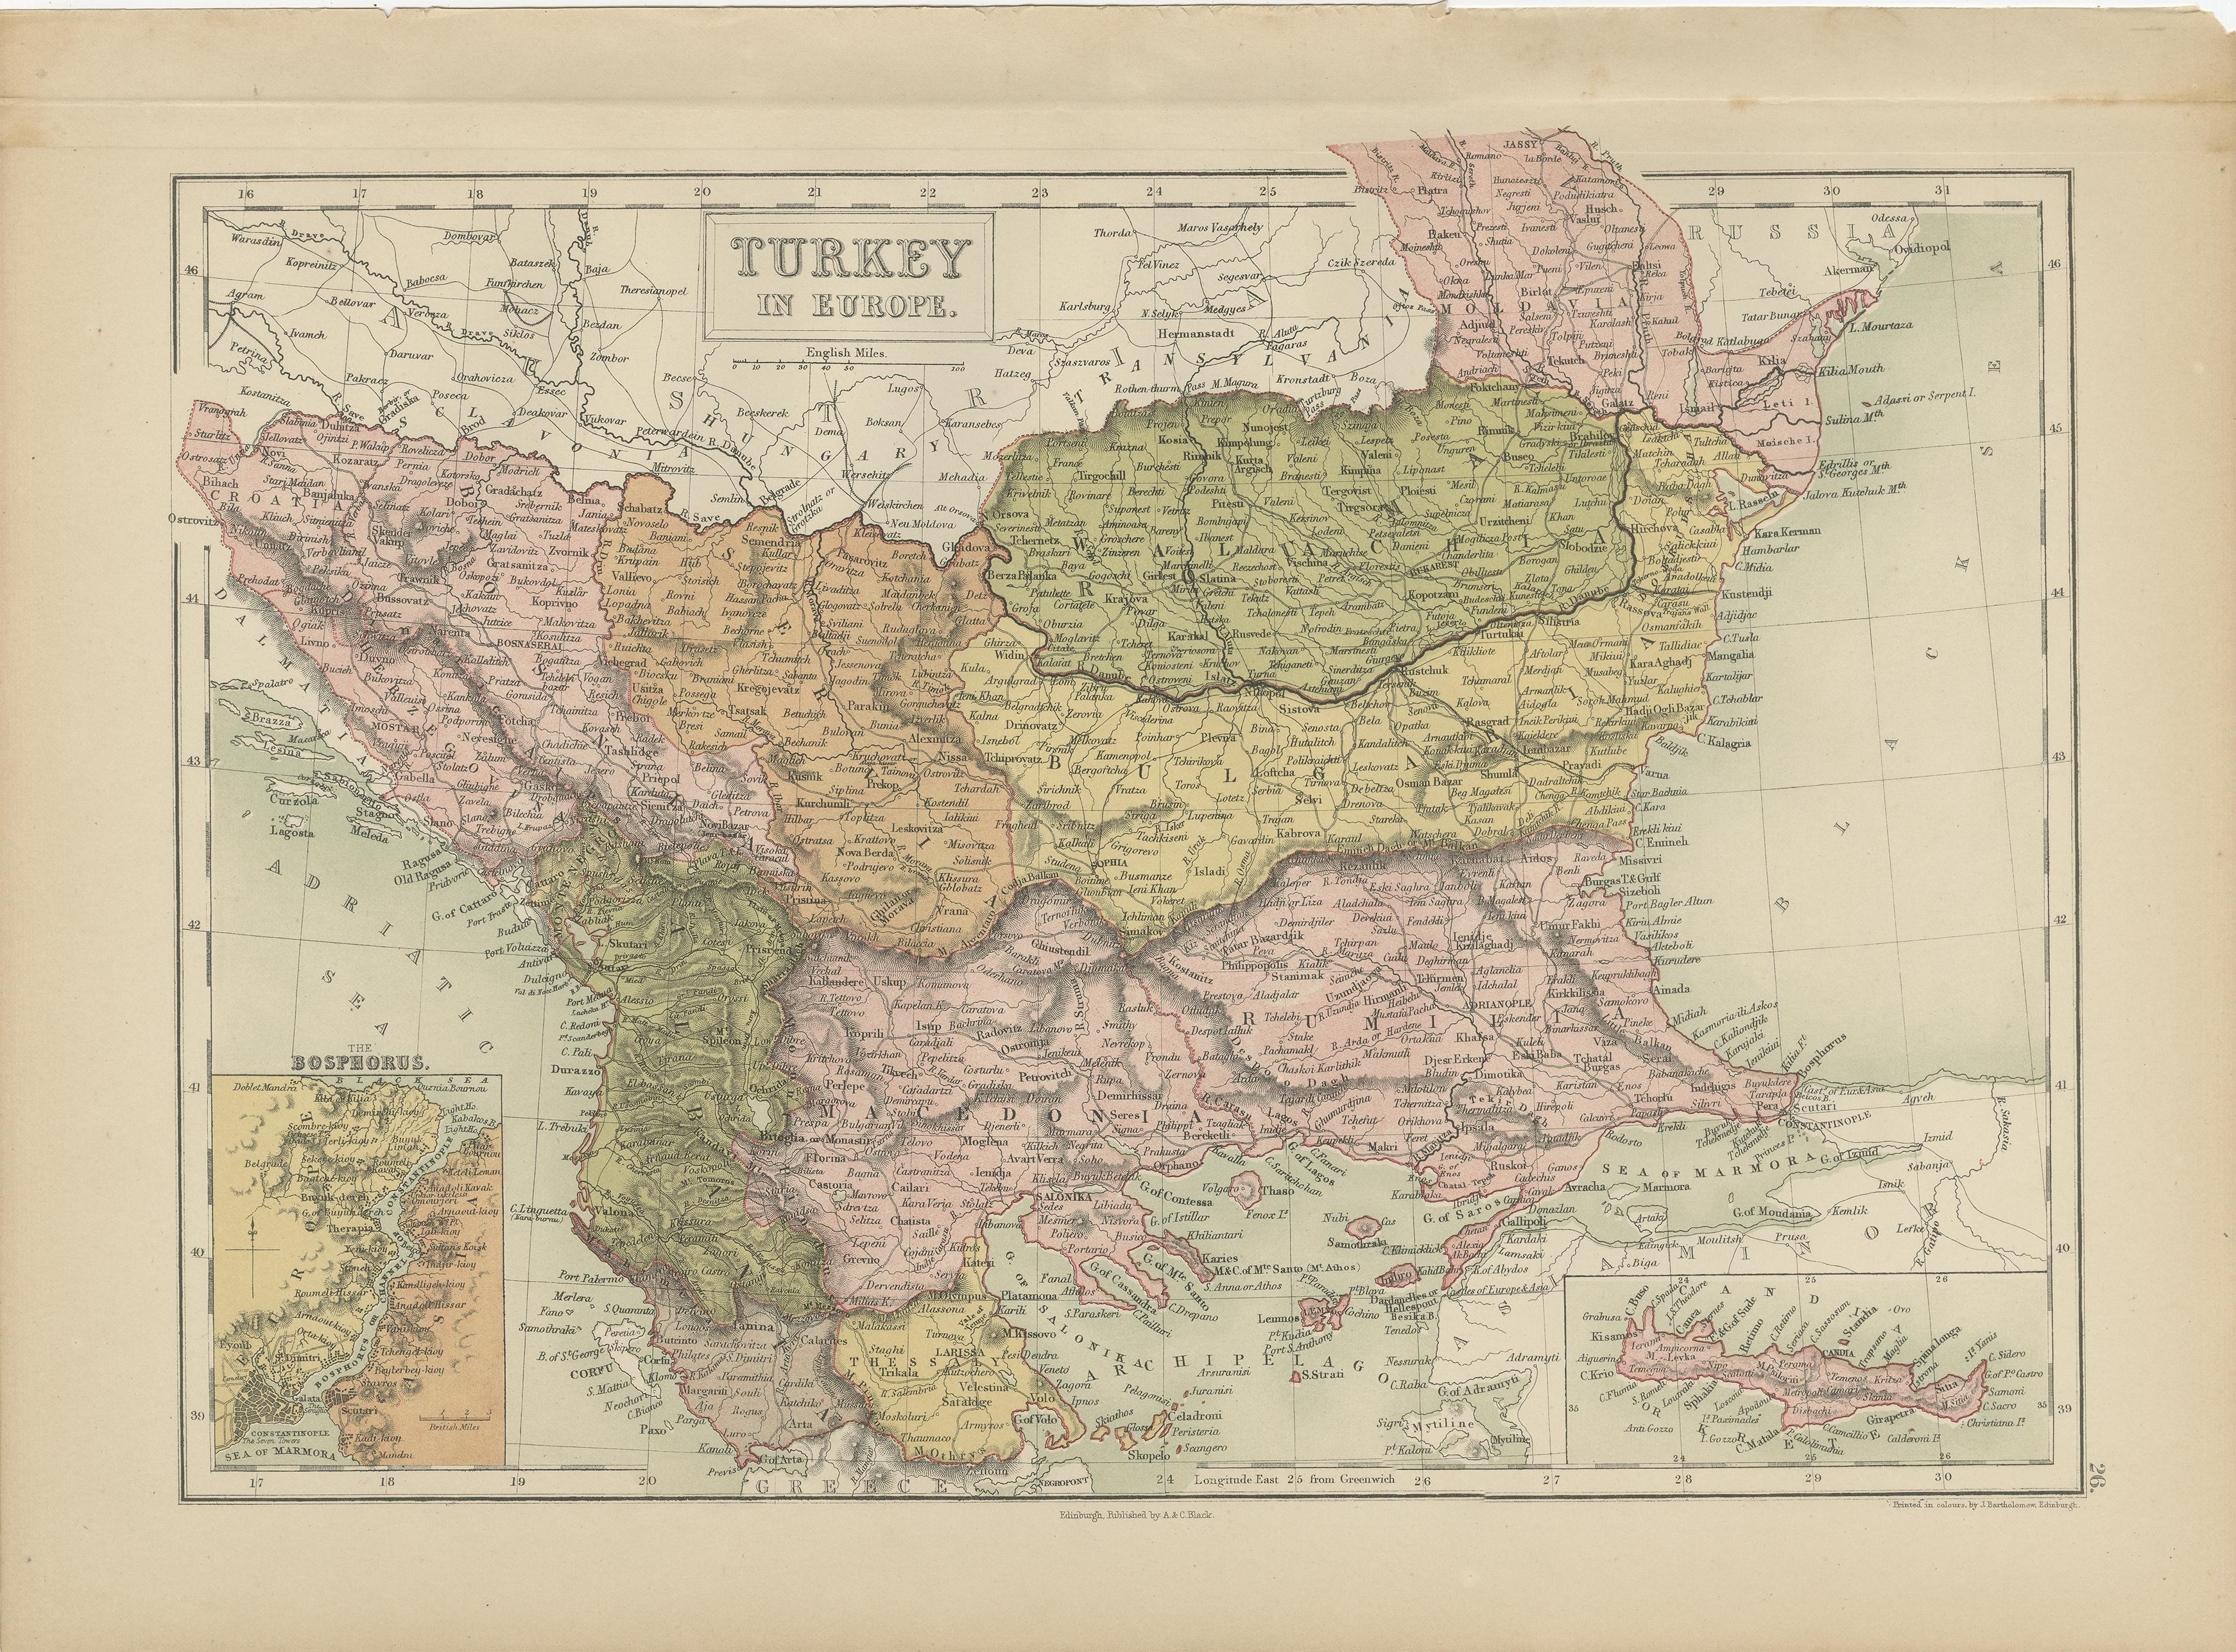 Antique map titled 'Turkey in Europe'. Original antique map of Turkey in Europe with inset maps of the Bosporus and Crete or Candia. This map originates from ‘Black's General Atlas of The World’. Published by A & C. Black, 1870.